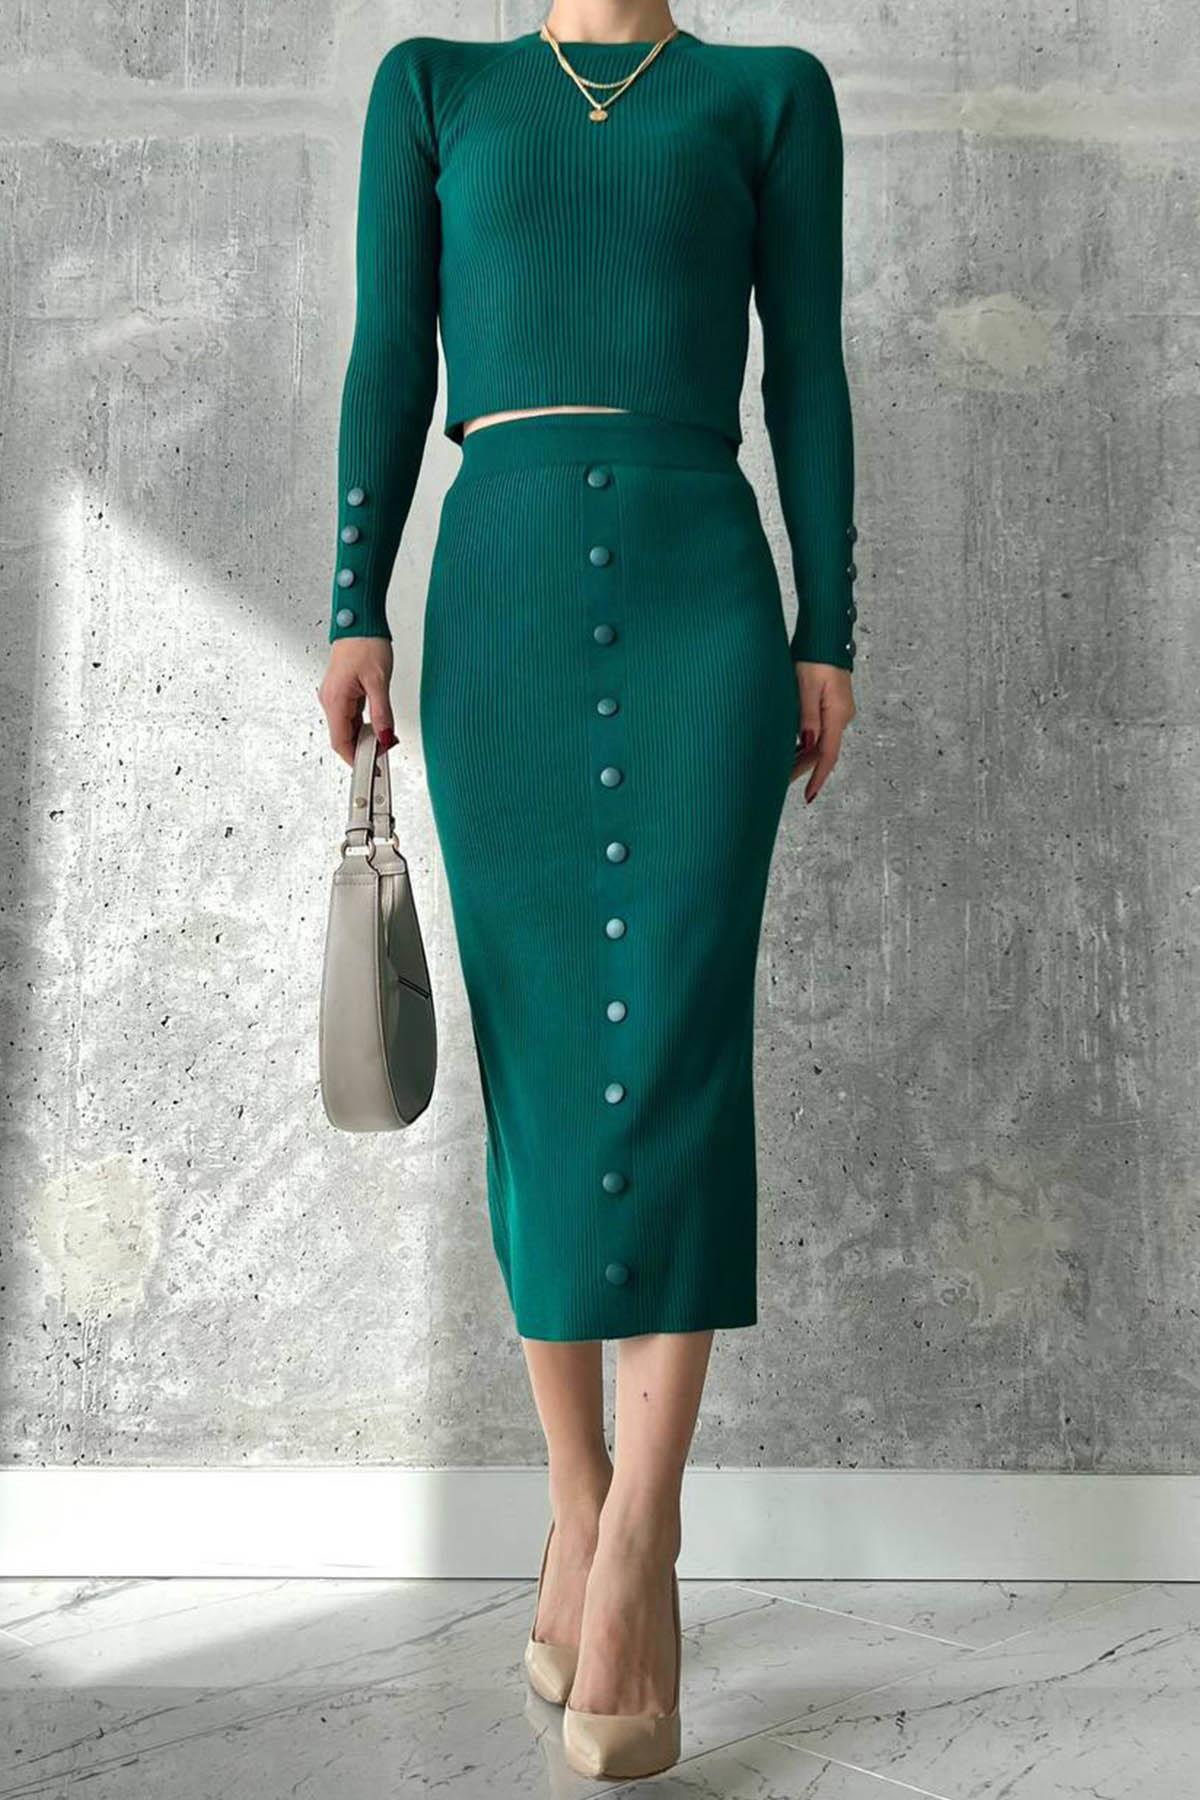 A wholesale clothing model wears Buttoned Skirt Suit - Yeni Nefti, Turkish wholesale Suit of Qustyle